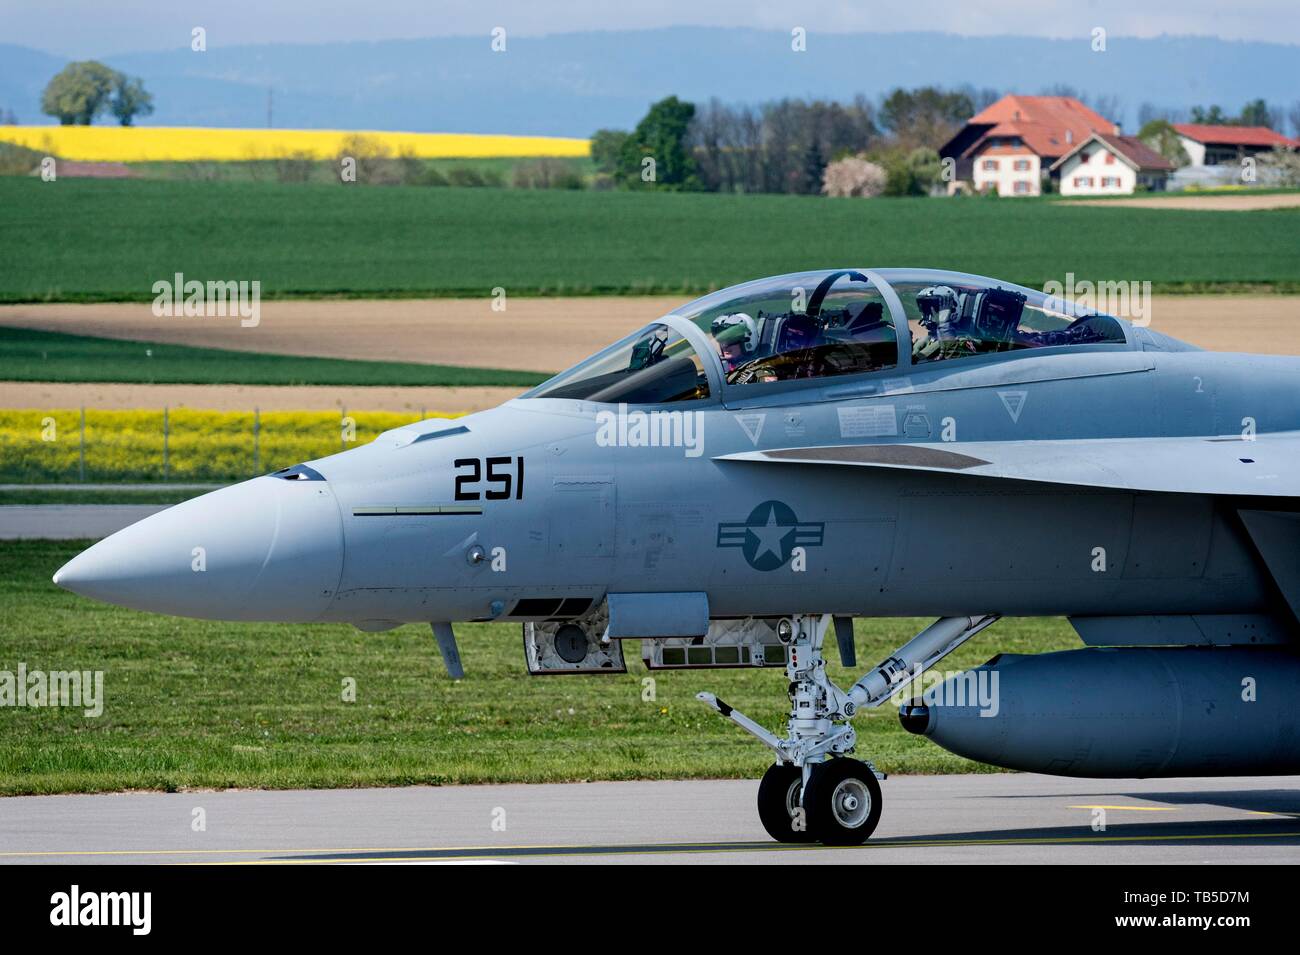 Cockpit, Boeing F/A-18 Super Hornet, Swiss Air Force, Payerne, Switzerland  Stock Photo - Alamy